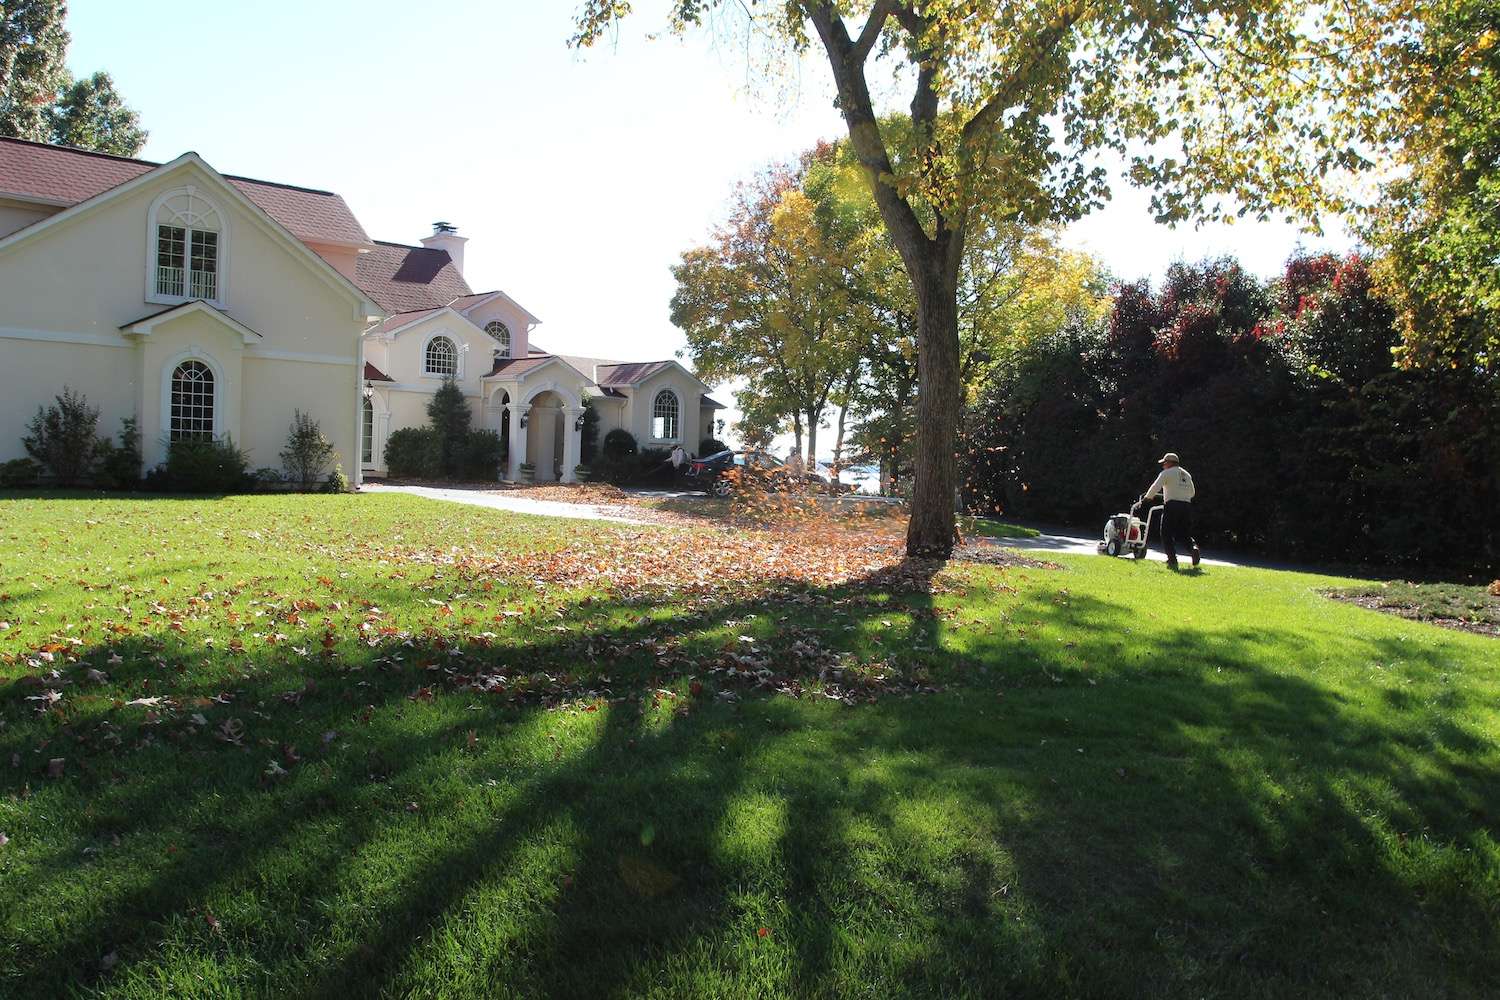 Leaf cleanup and lawn maintenance services